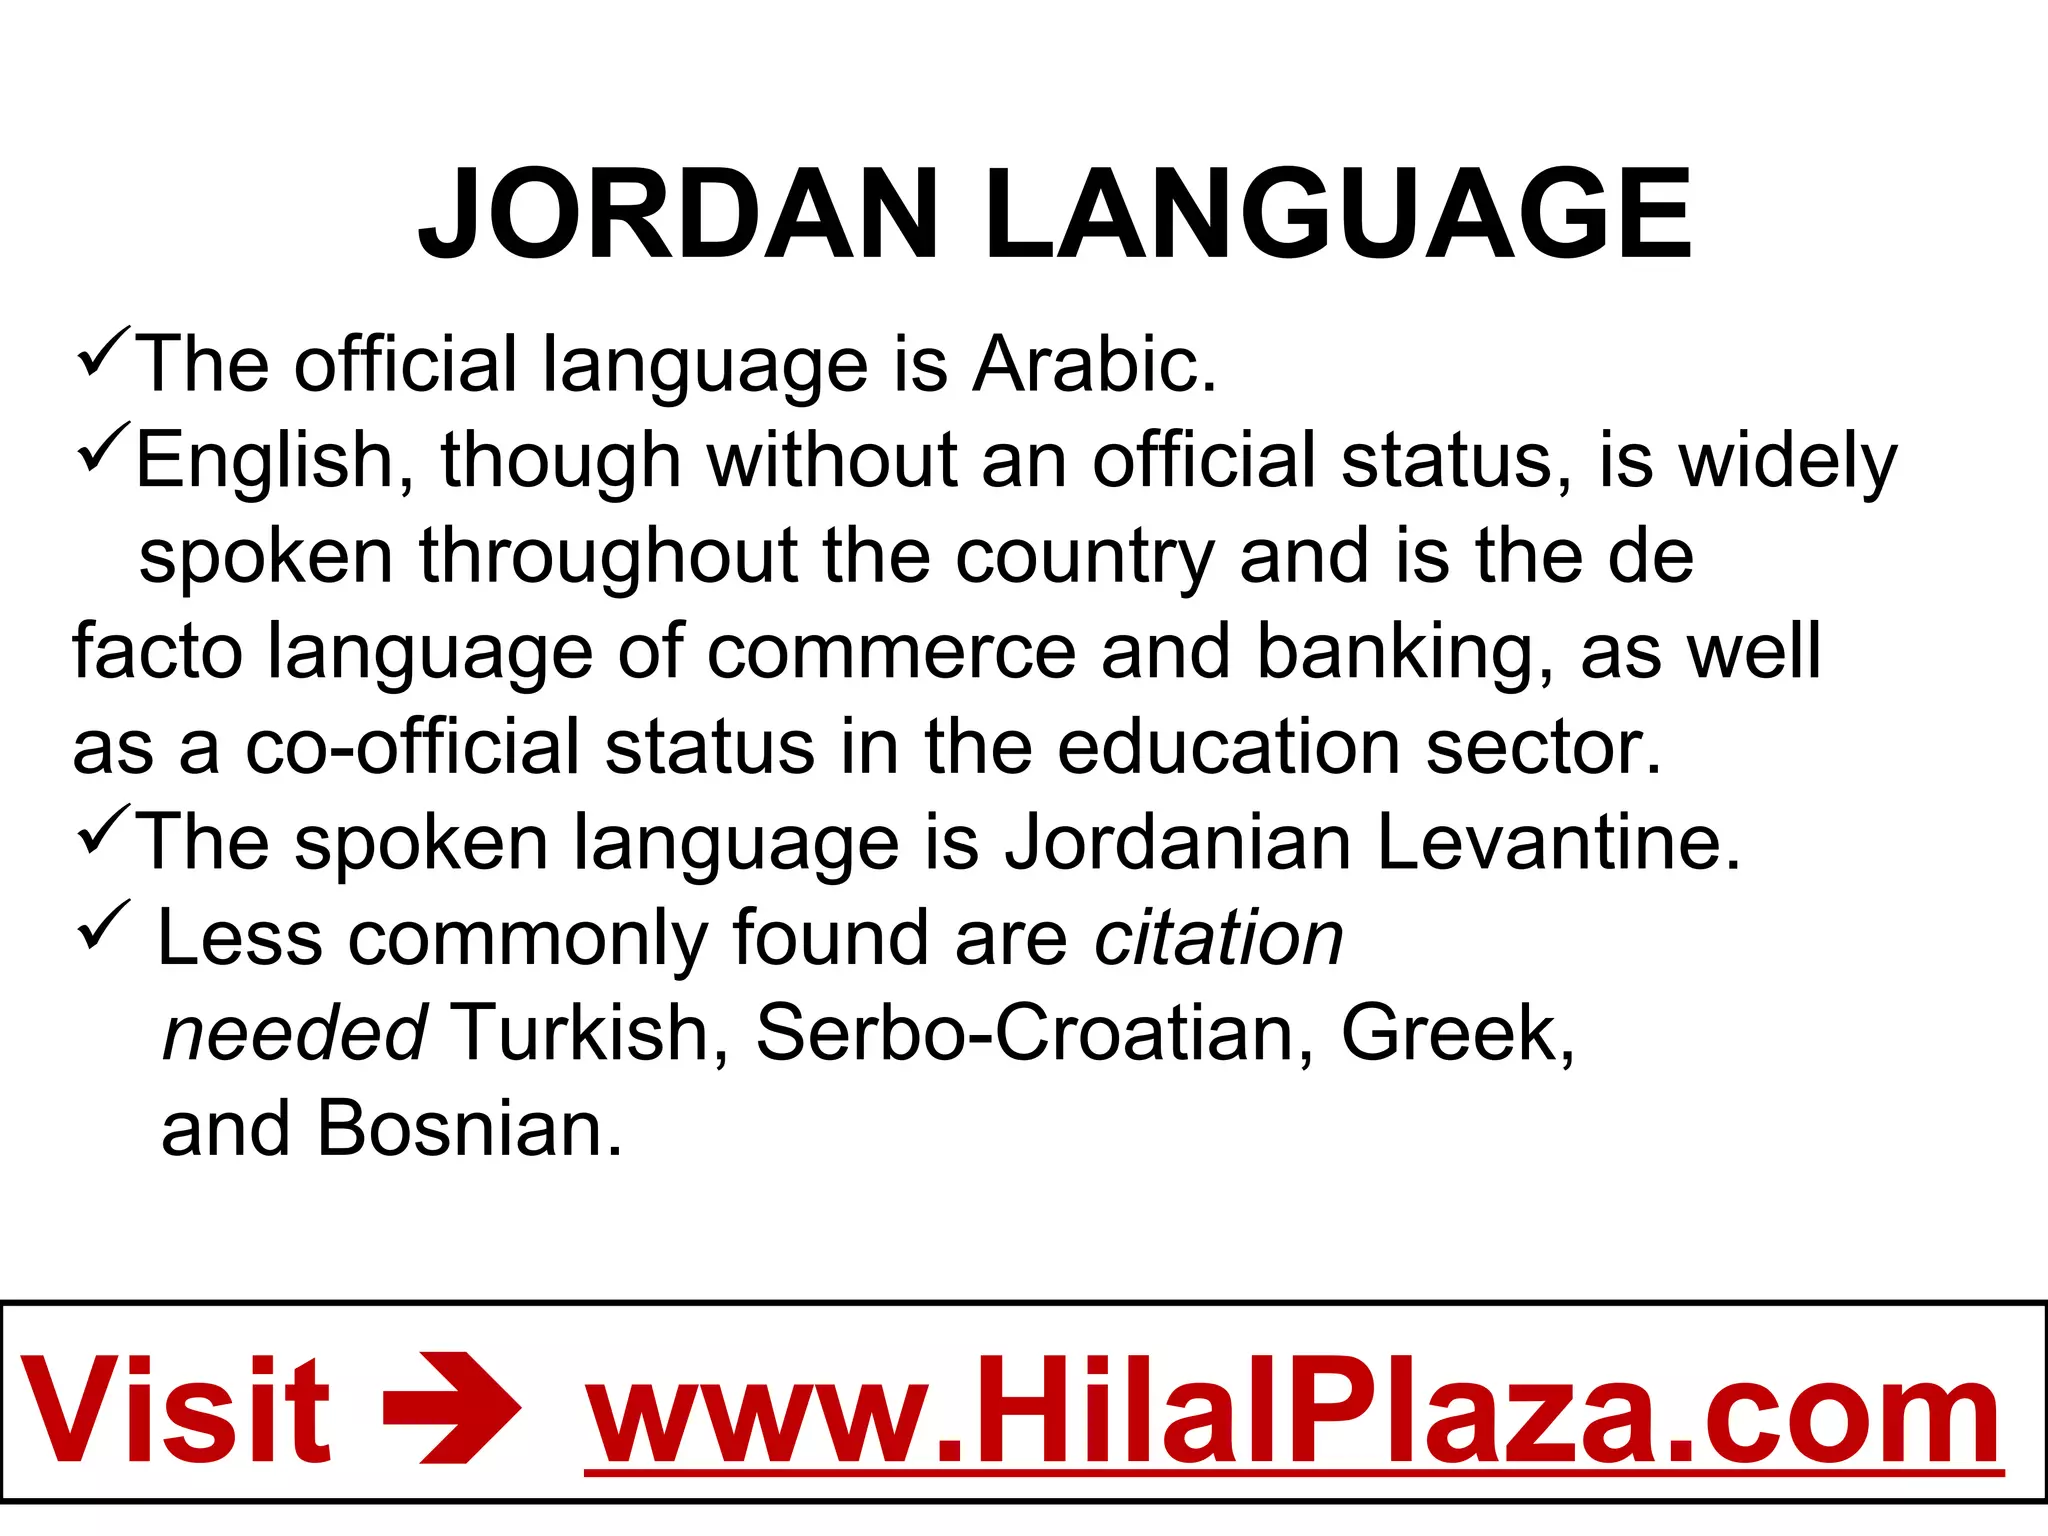 Método Padre fage Provisional Jordan - A Middle Eastern and Gulf Country